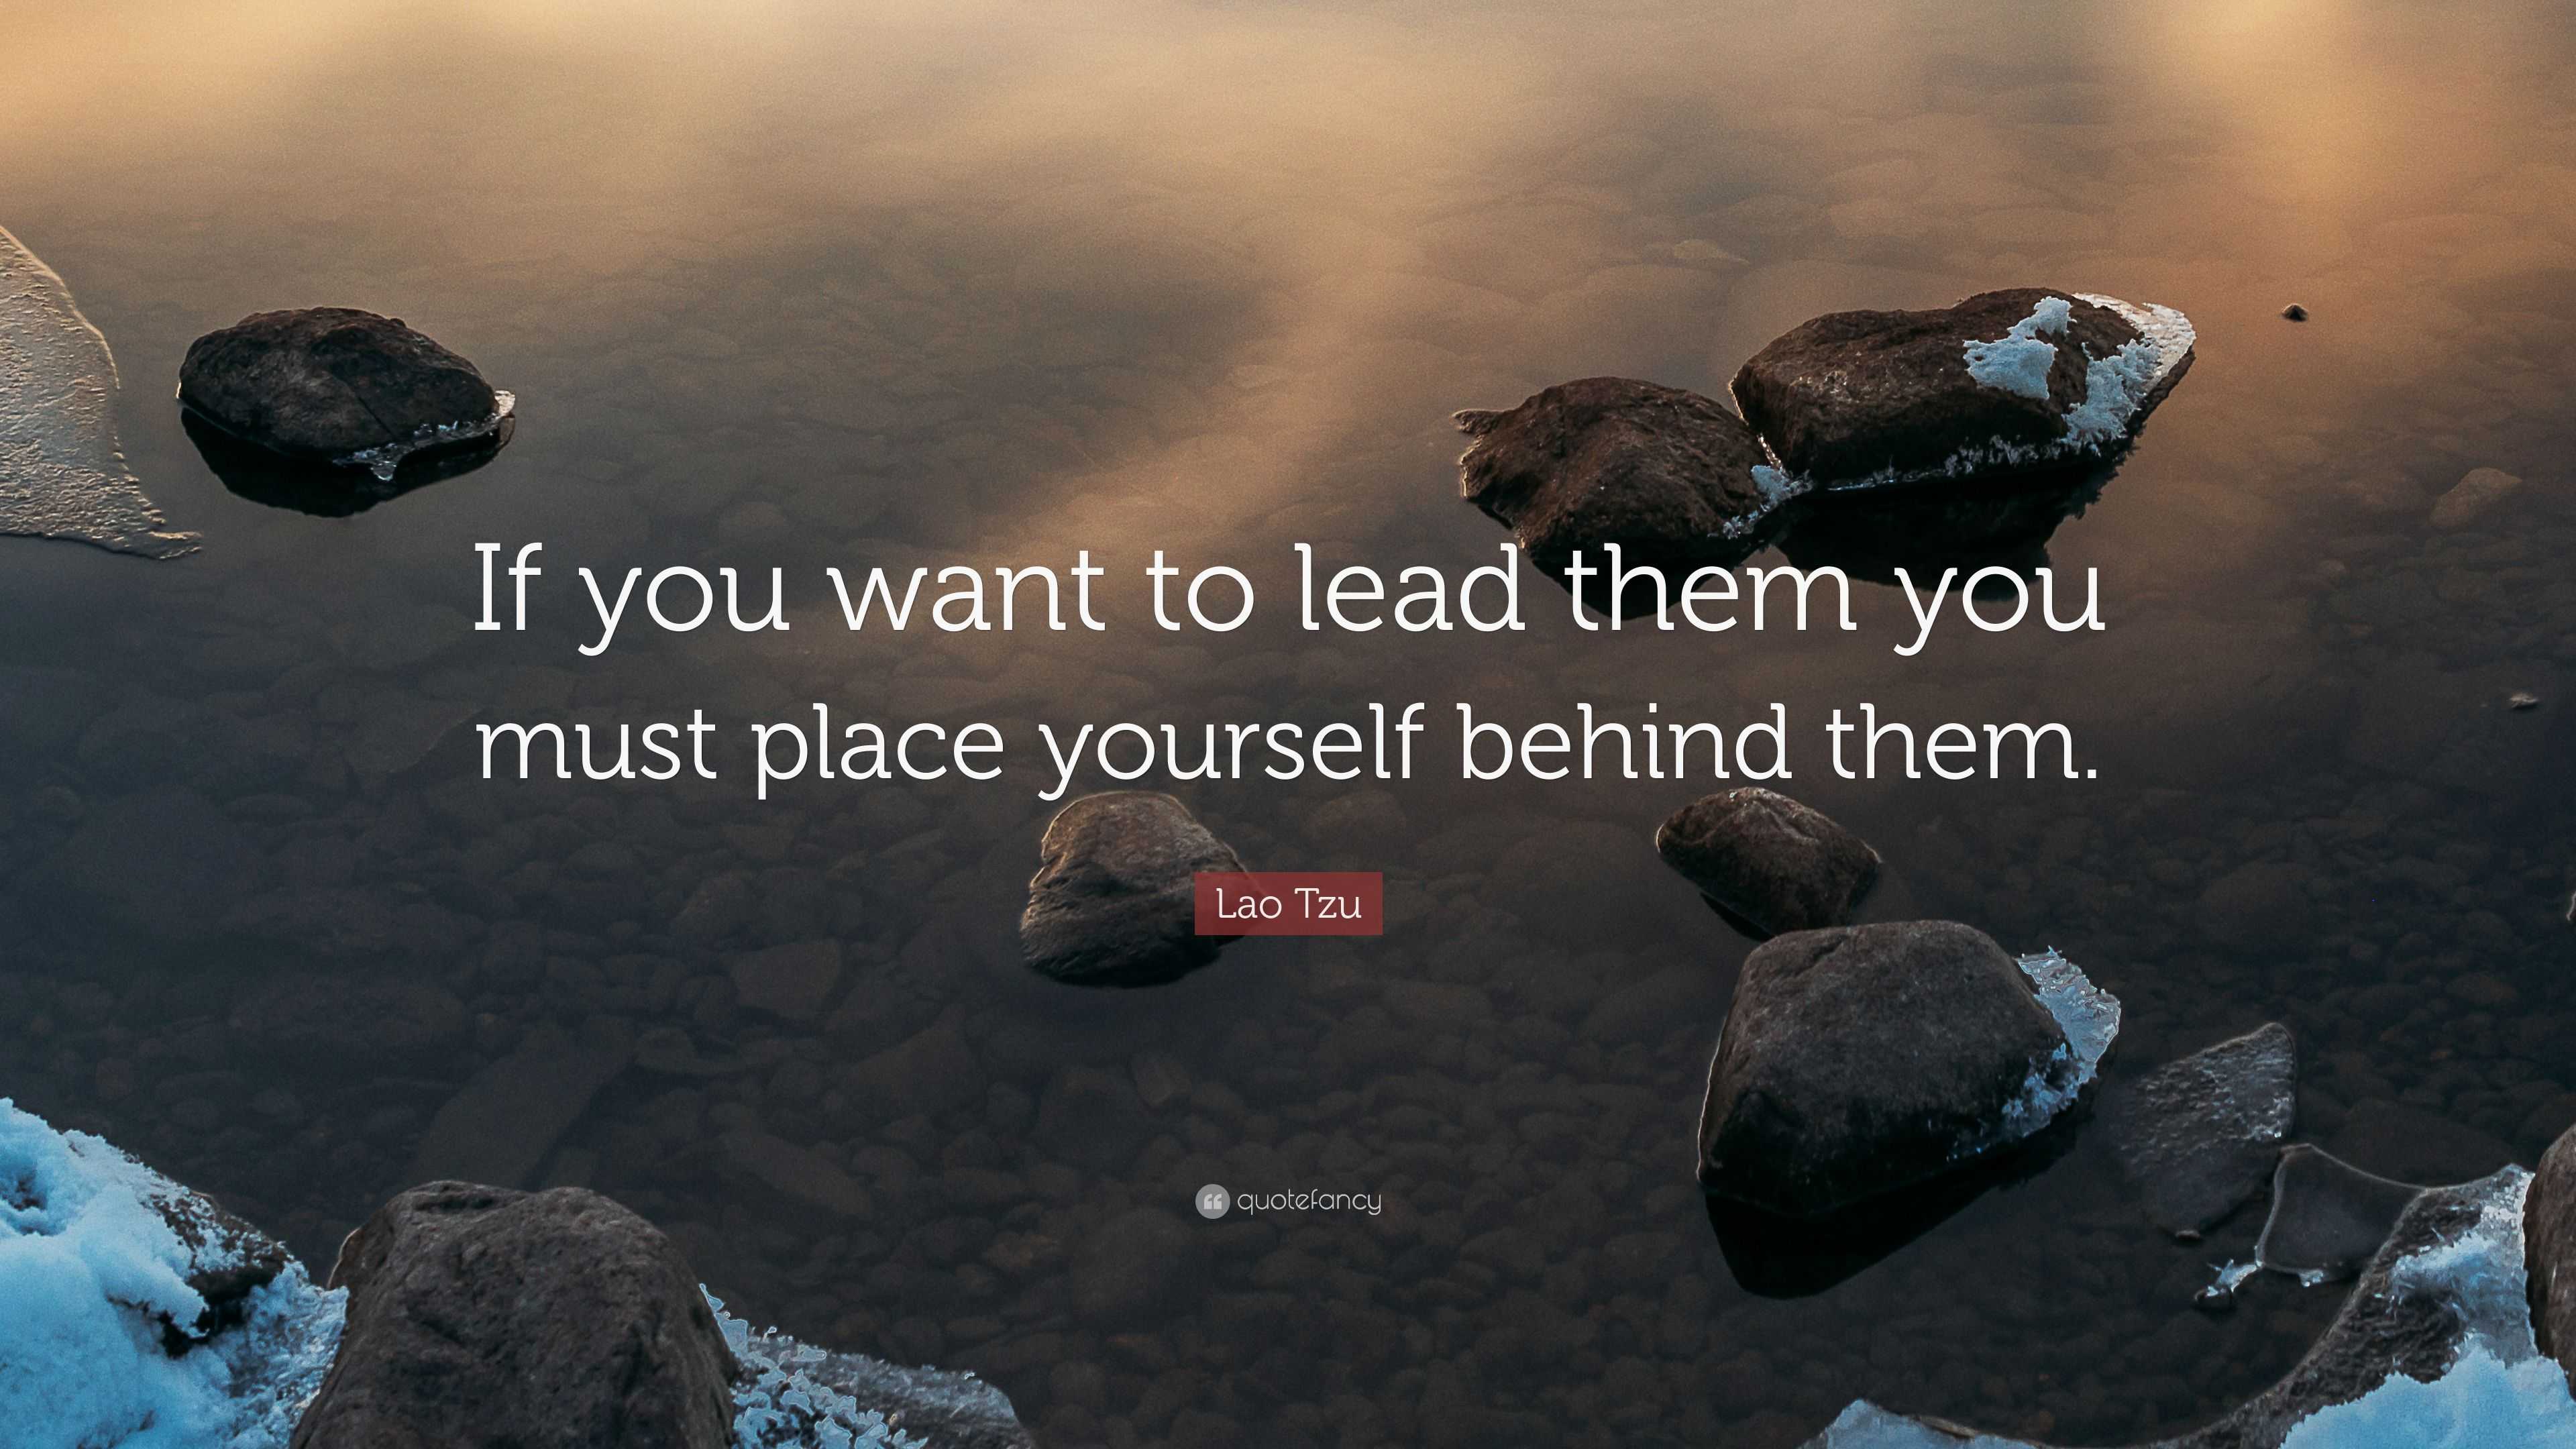 Lao Tzu Quote: “If you want to lead them you must place yourself behind ...